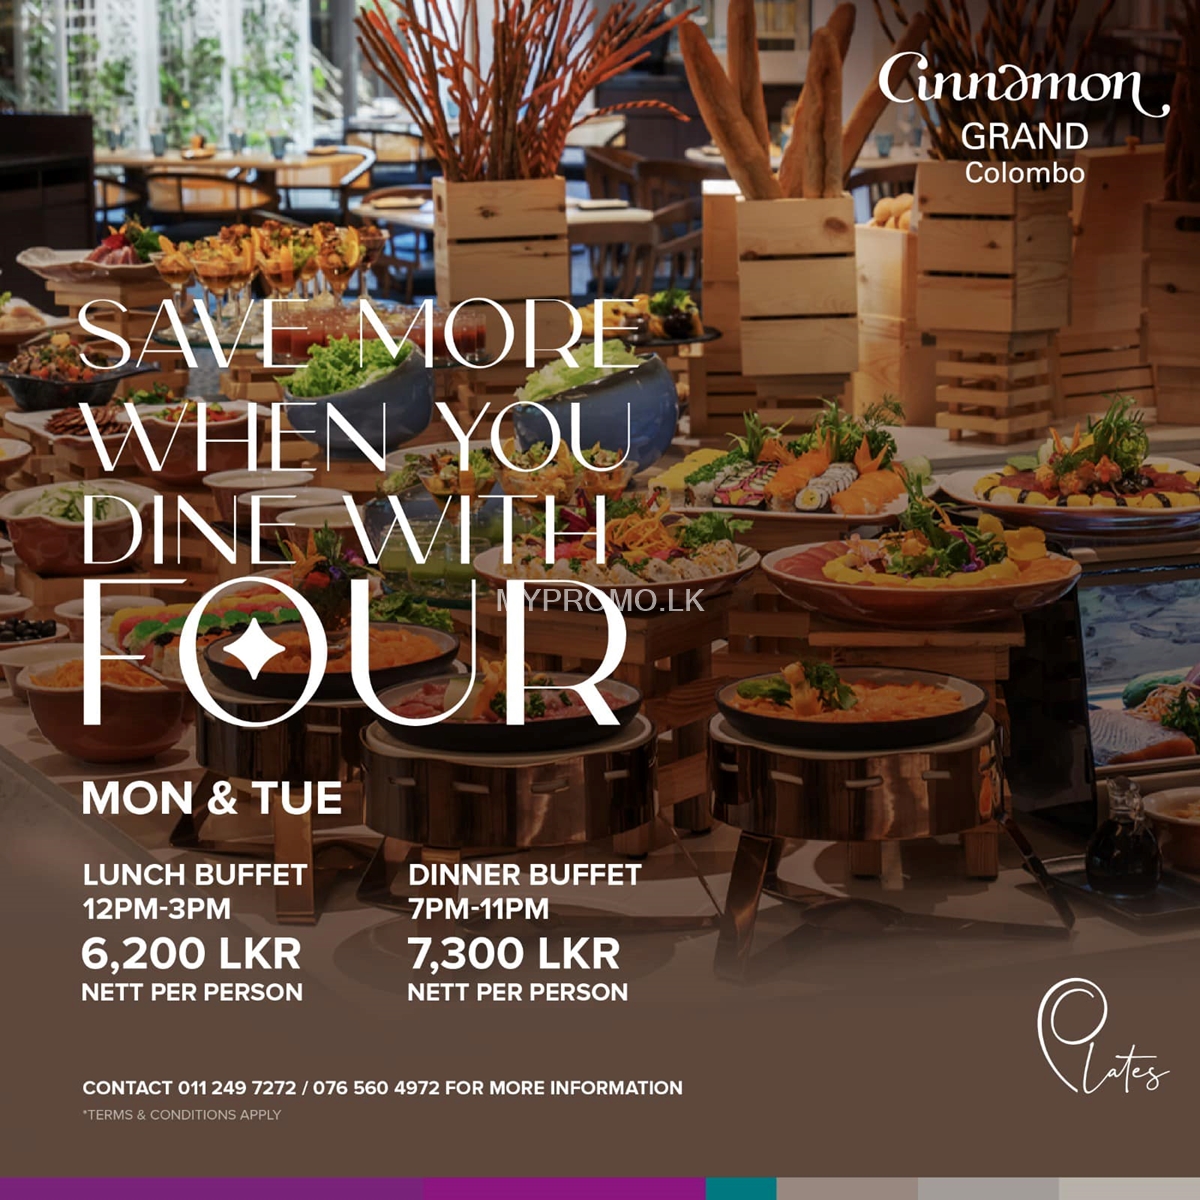 Save More when you dine with four at Cinnamon Grand